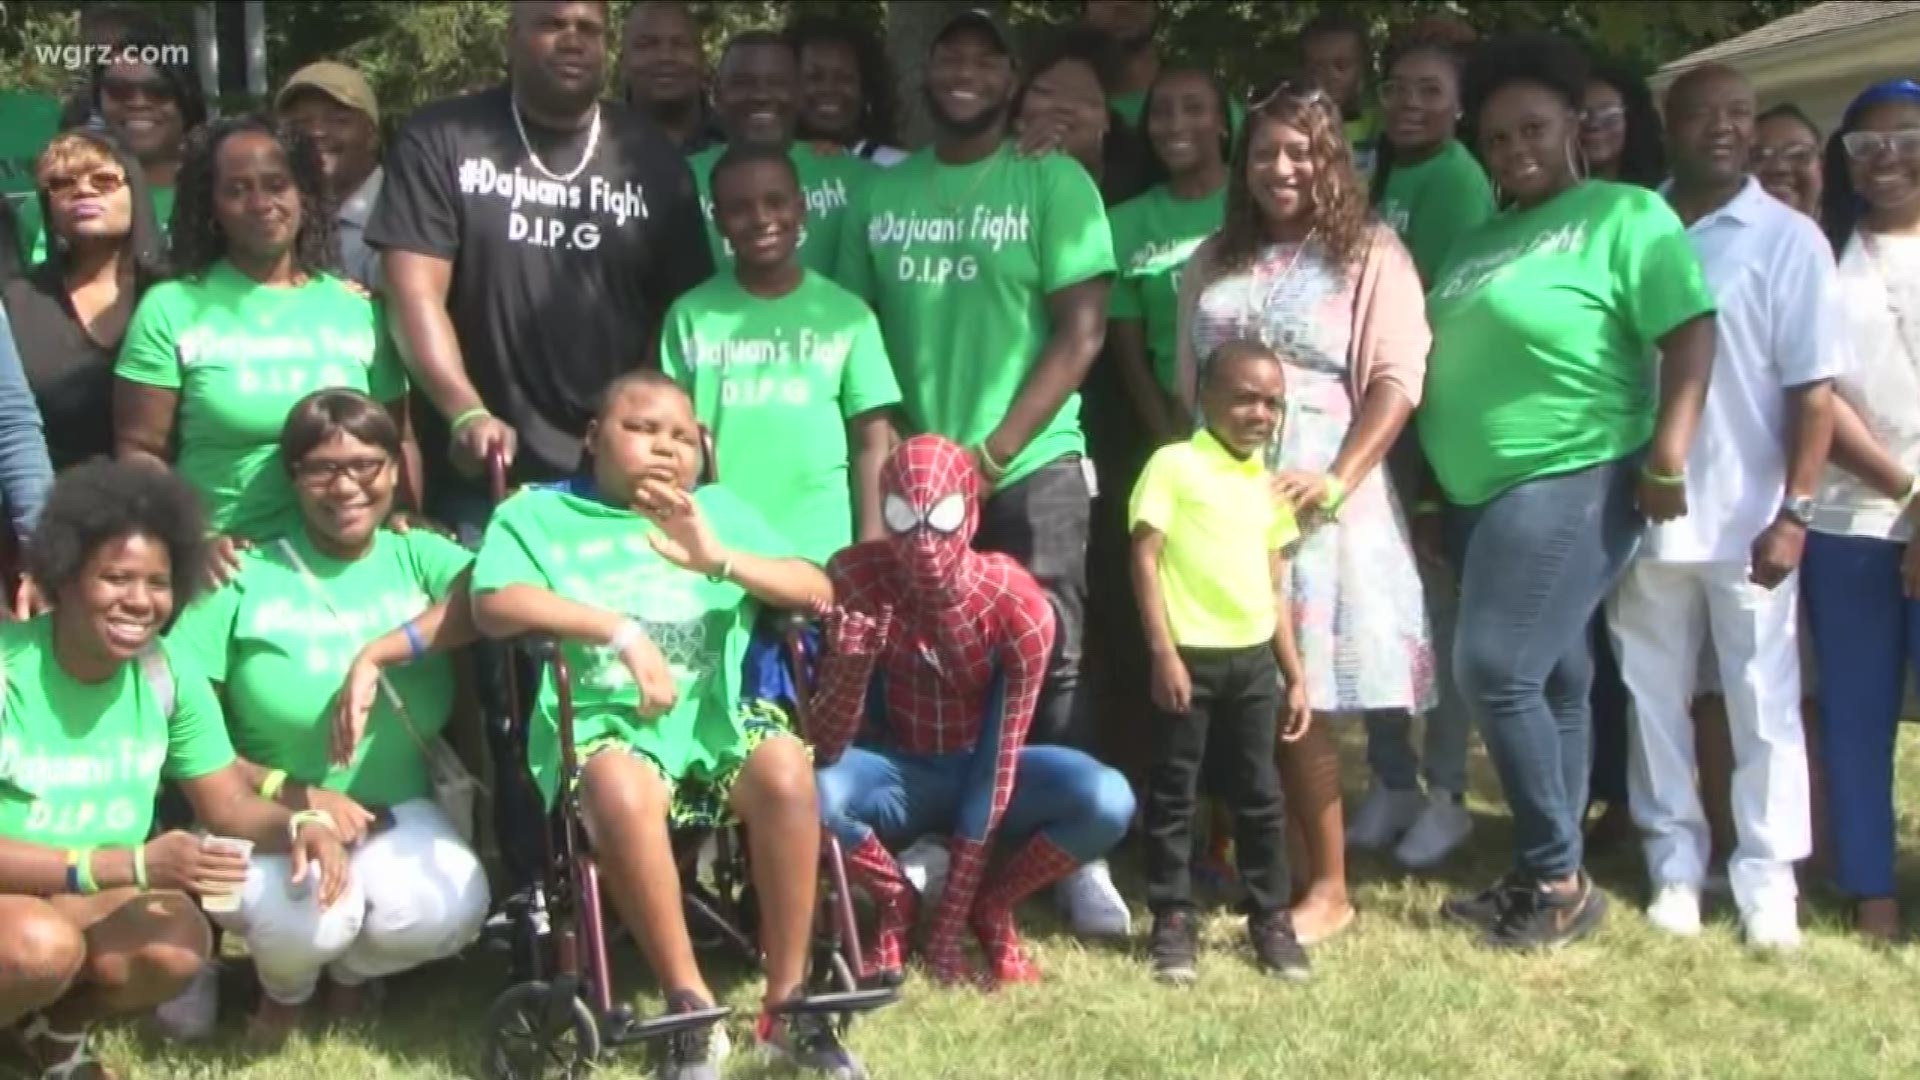 A local family is feeling the support of their community as a fundraiser was held today, to benefit their son who is fighting a rare form of brain cancer.